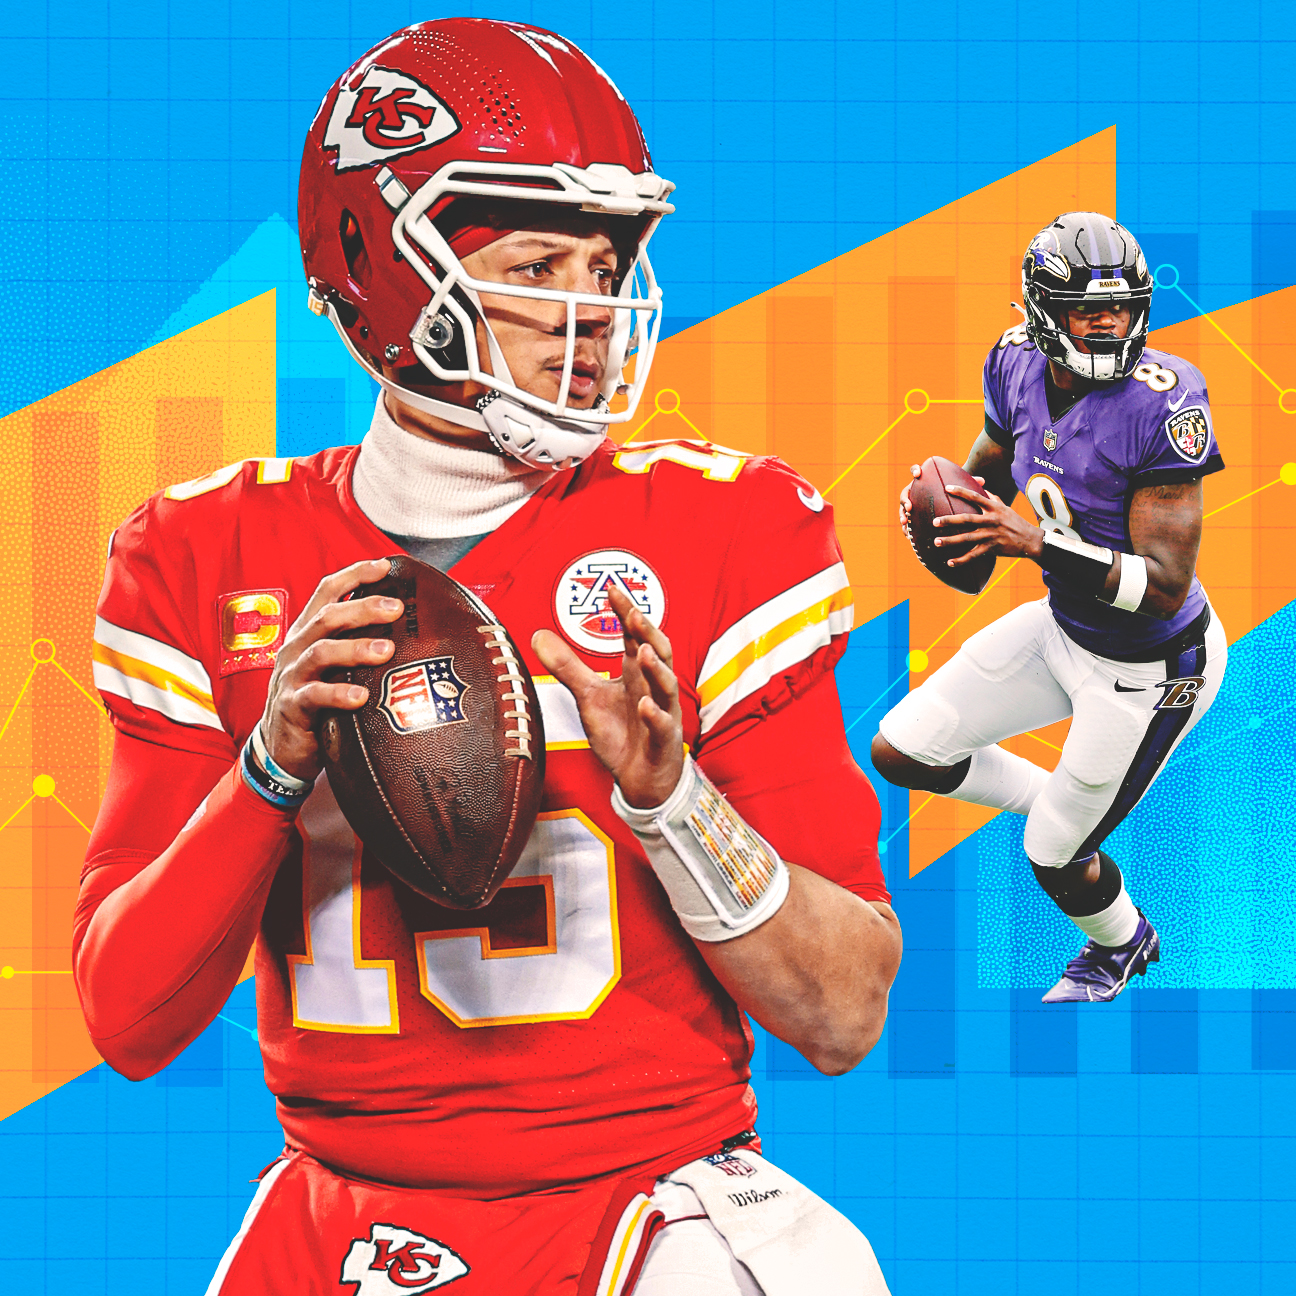 Way-too-early NFL Power Rankings: Where do the Super Bowl champs land?